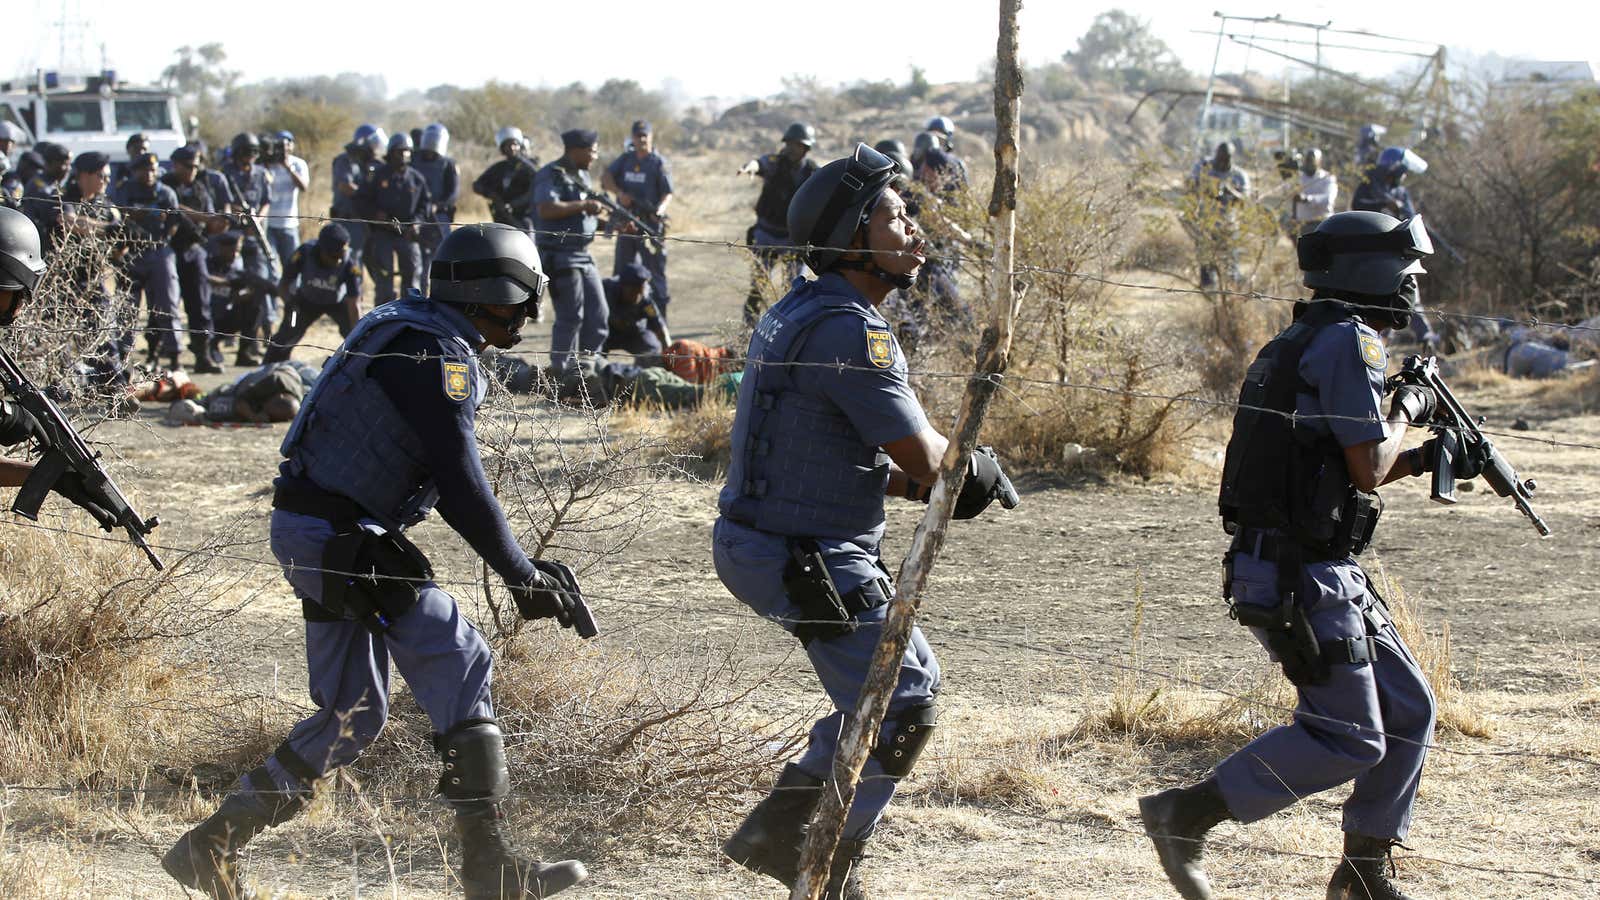 South African police taking on protesting miners on Aug 16, 2012 at Marikana mine